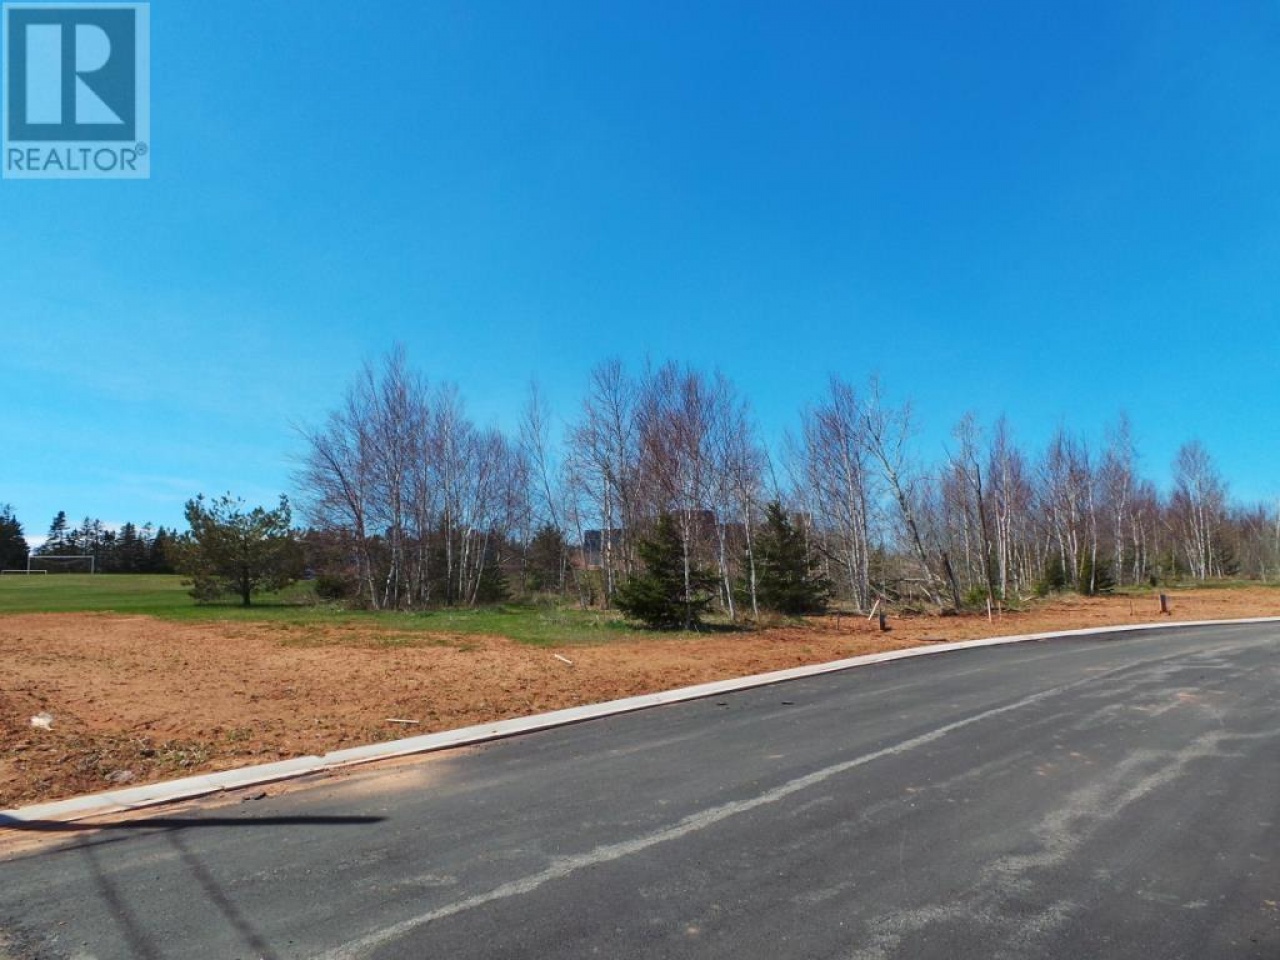 Lot 20-7 Waterview HeightsLot 20-7 Waterview Heights, Summerside, Prince Edward Island C1N6H5, ,Vacant Land,For Sale,Lot 20-7 Waterview Heights,202111411